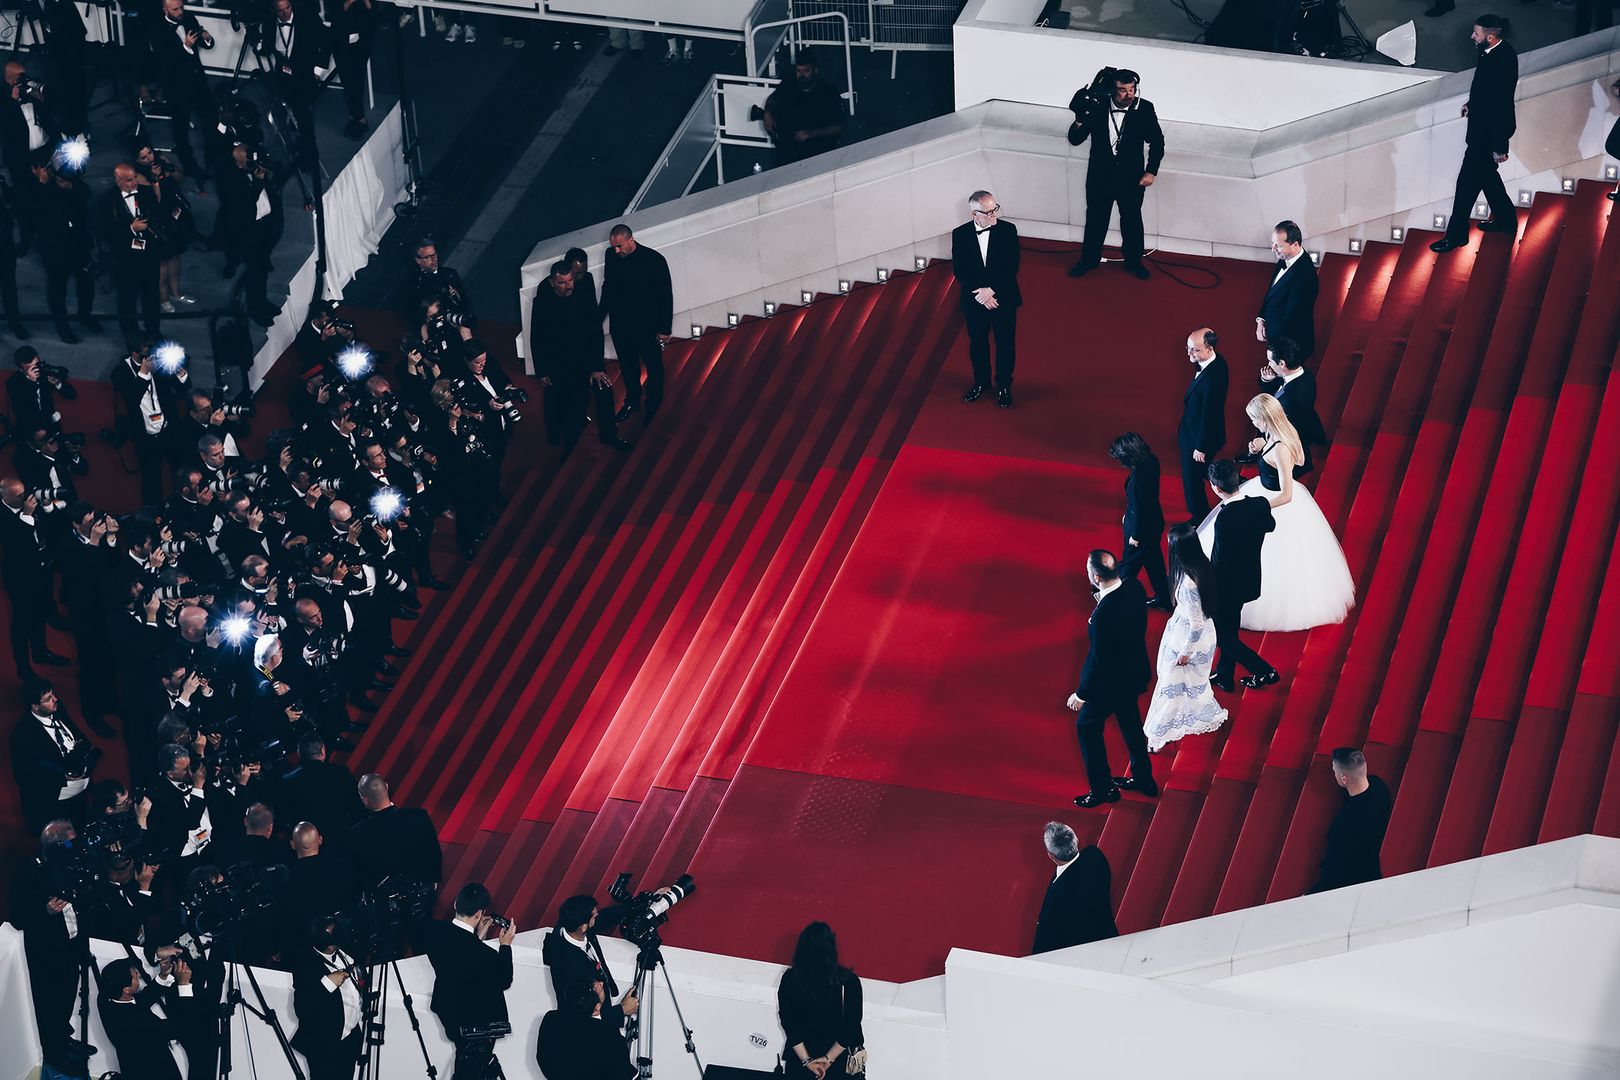 75th Cannes Film Festival is over. Award winners, highlights and celebrities during the brilliant closing ceremony.